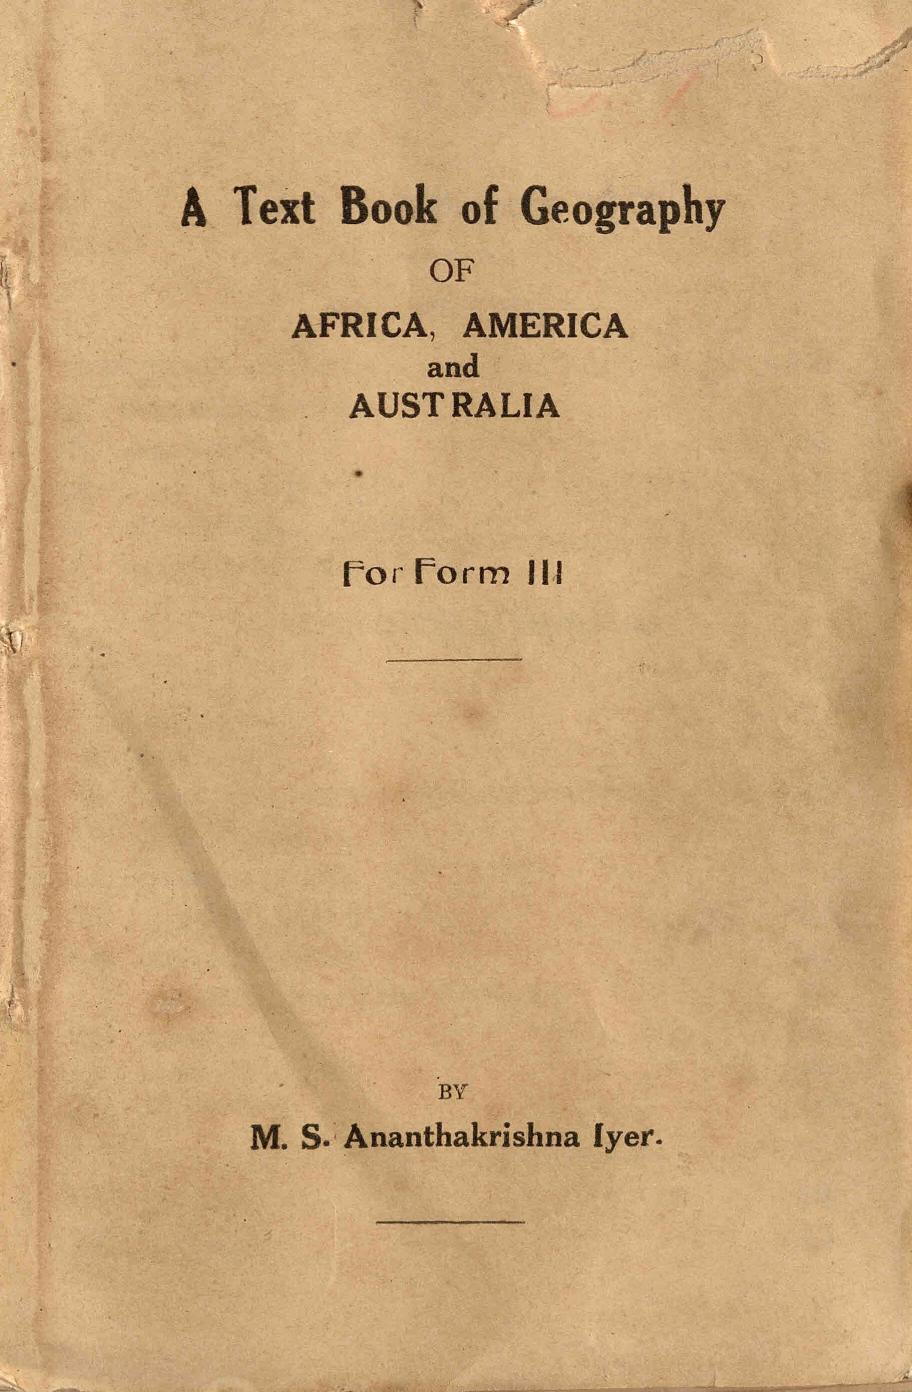 1935 - A Text Book of Geography - M. S. Anantha Krishna Iyer